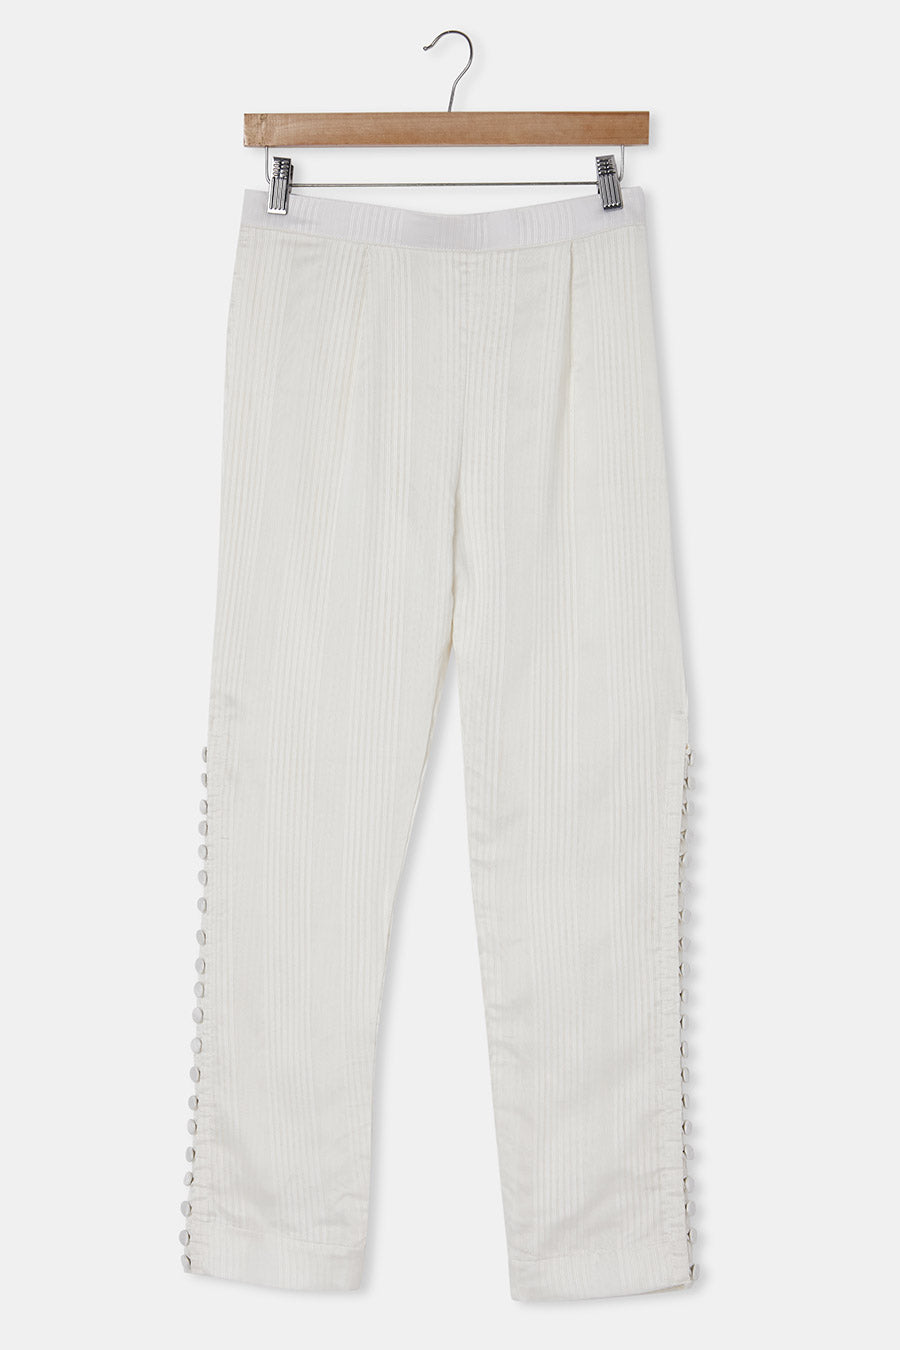 Grace - Off-White Striped Straight Pant